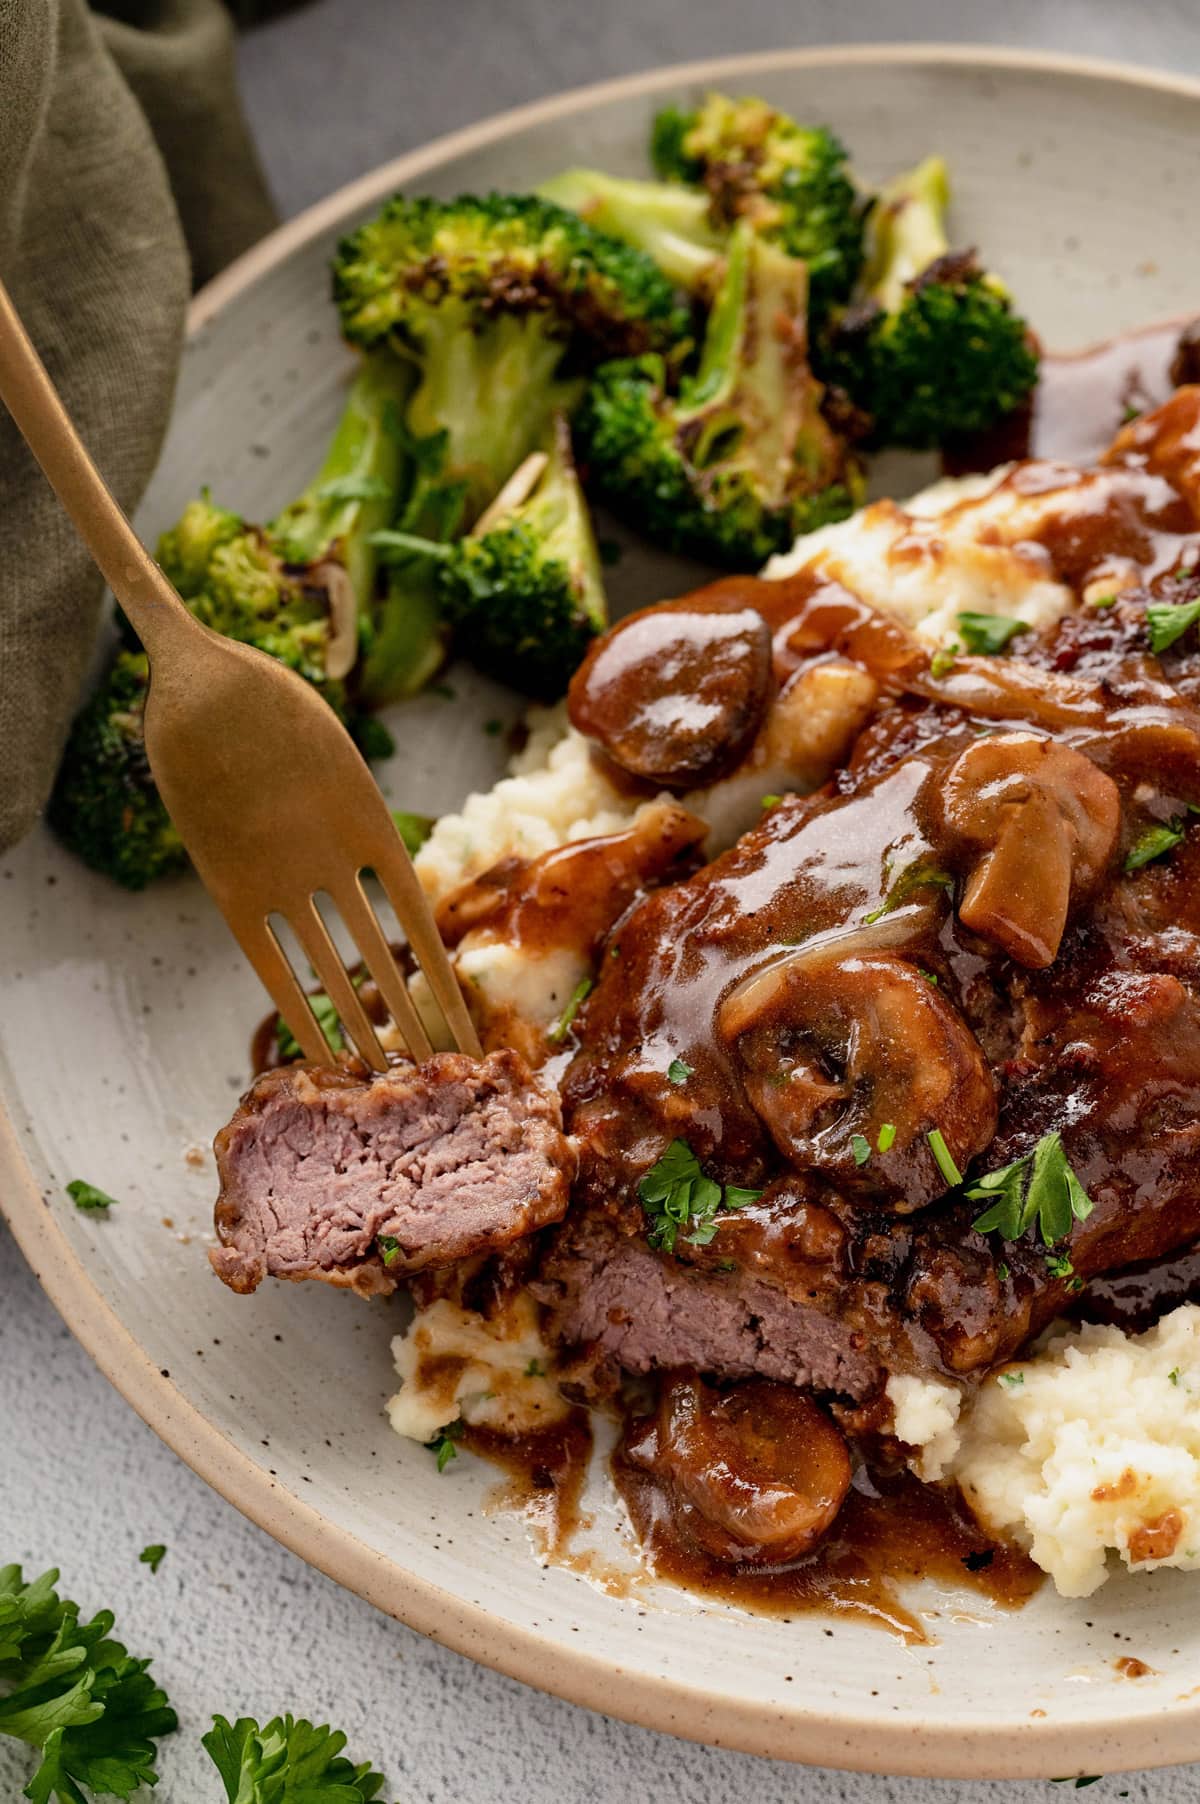 Cubed steak with gravy over mashed potatoes. 